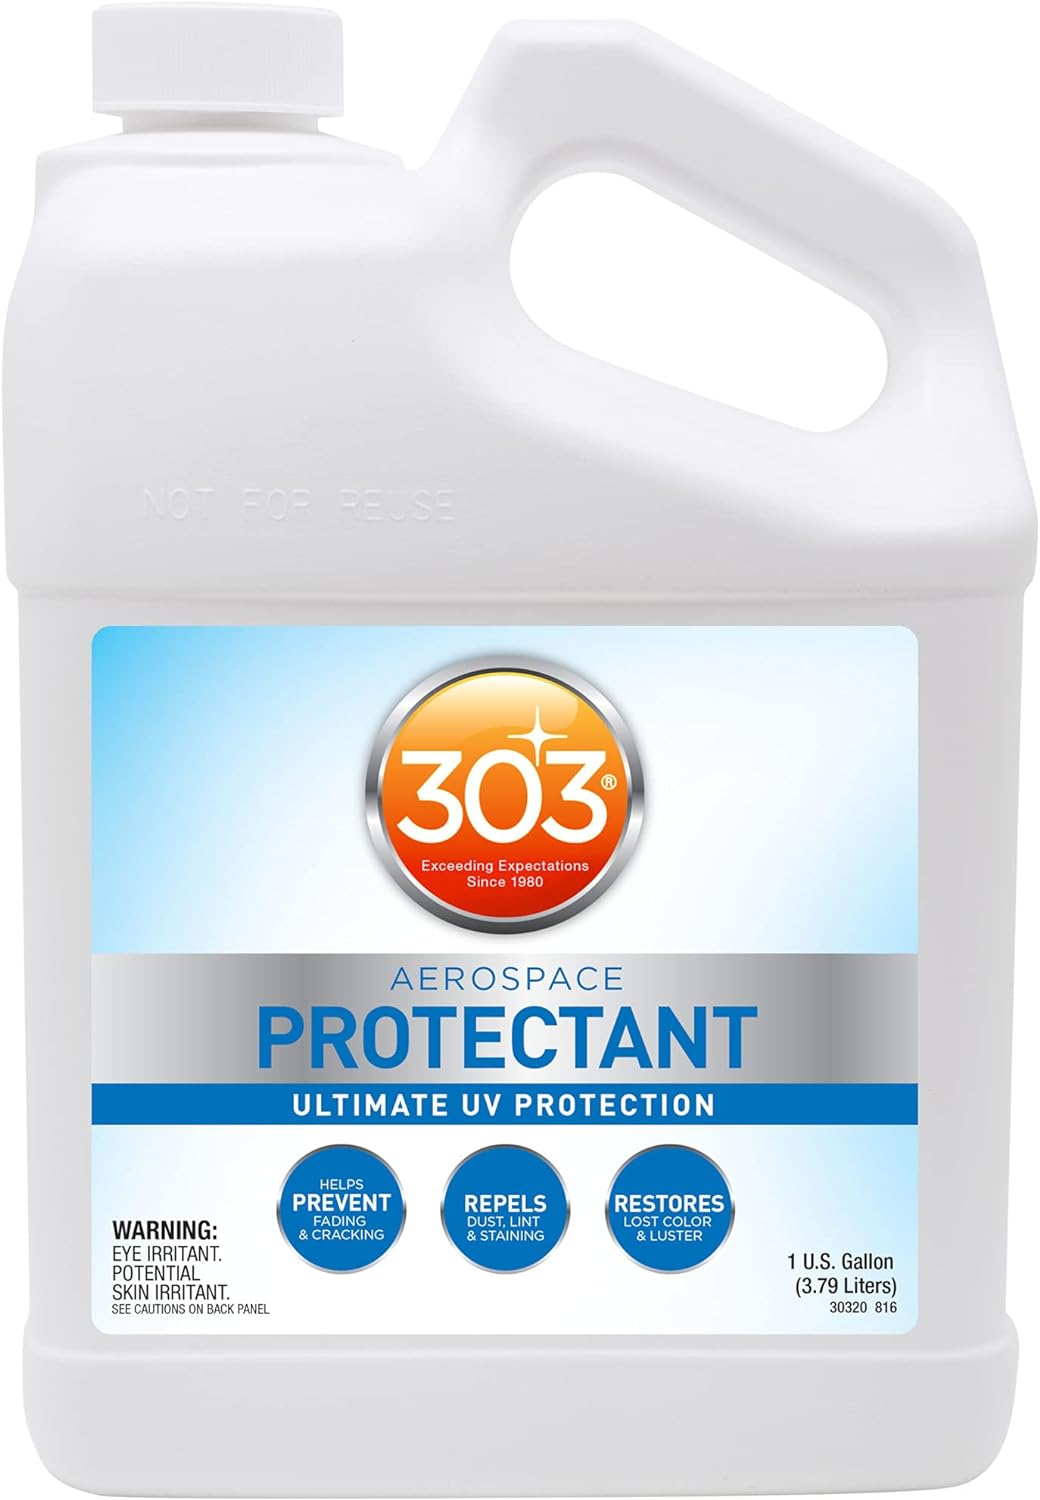 128oz 303 Products Aerospace Protectant Spray-on UV Protection $43.20 w/ Subscribe & Save + Free Shipping